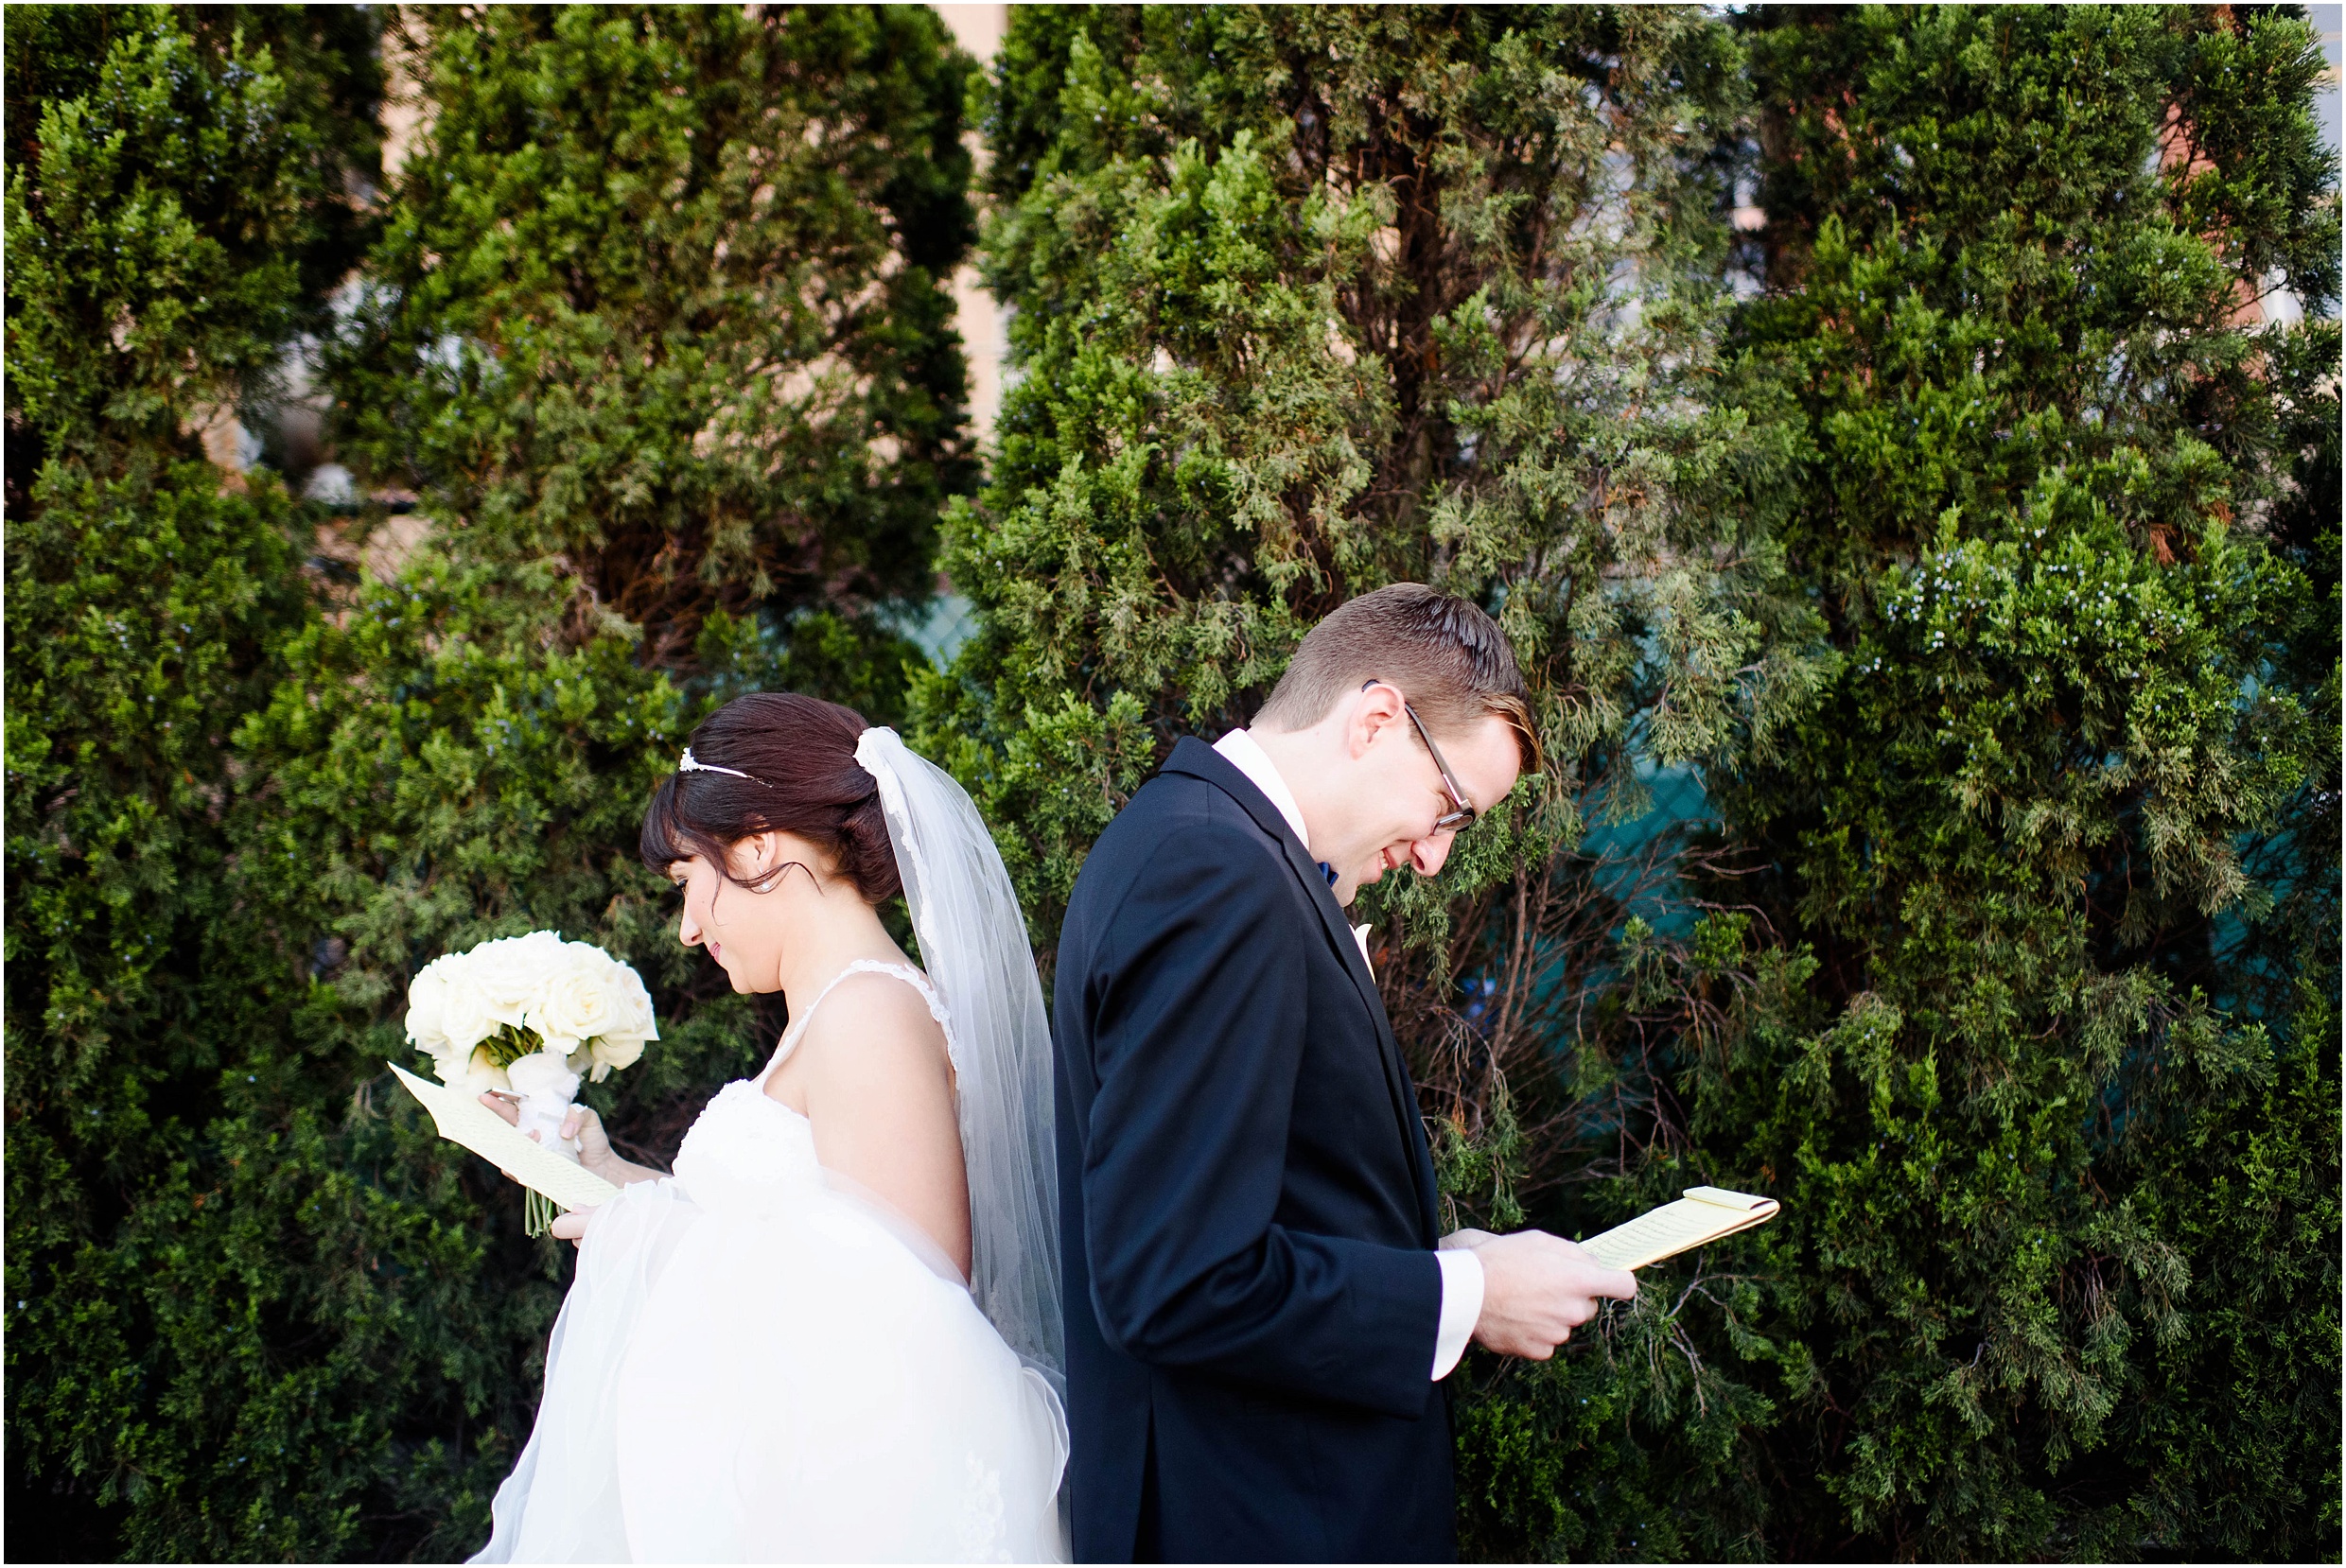 View More: http://alisonmishphotography.pass.us/kelsey-jeff-wedding